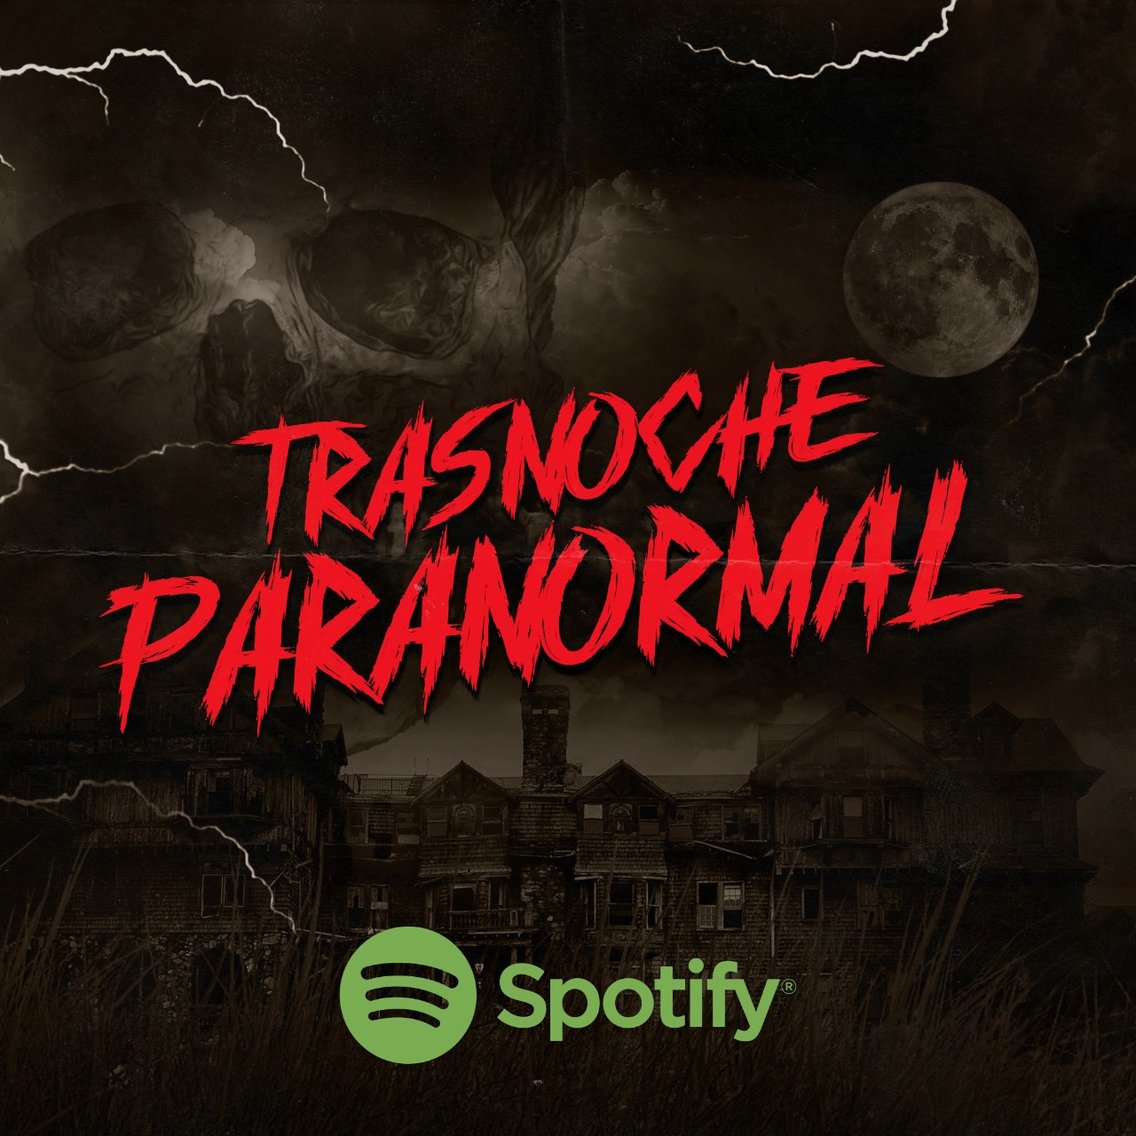 Trasnoche Paranormal - Cover Image